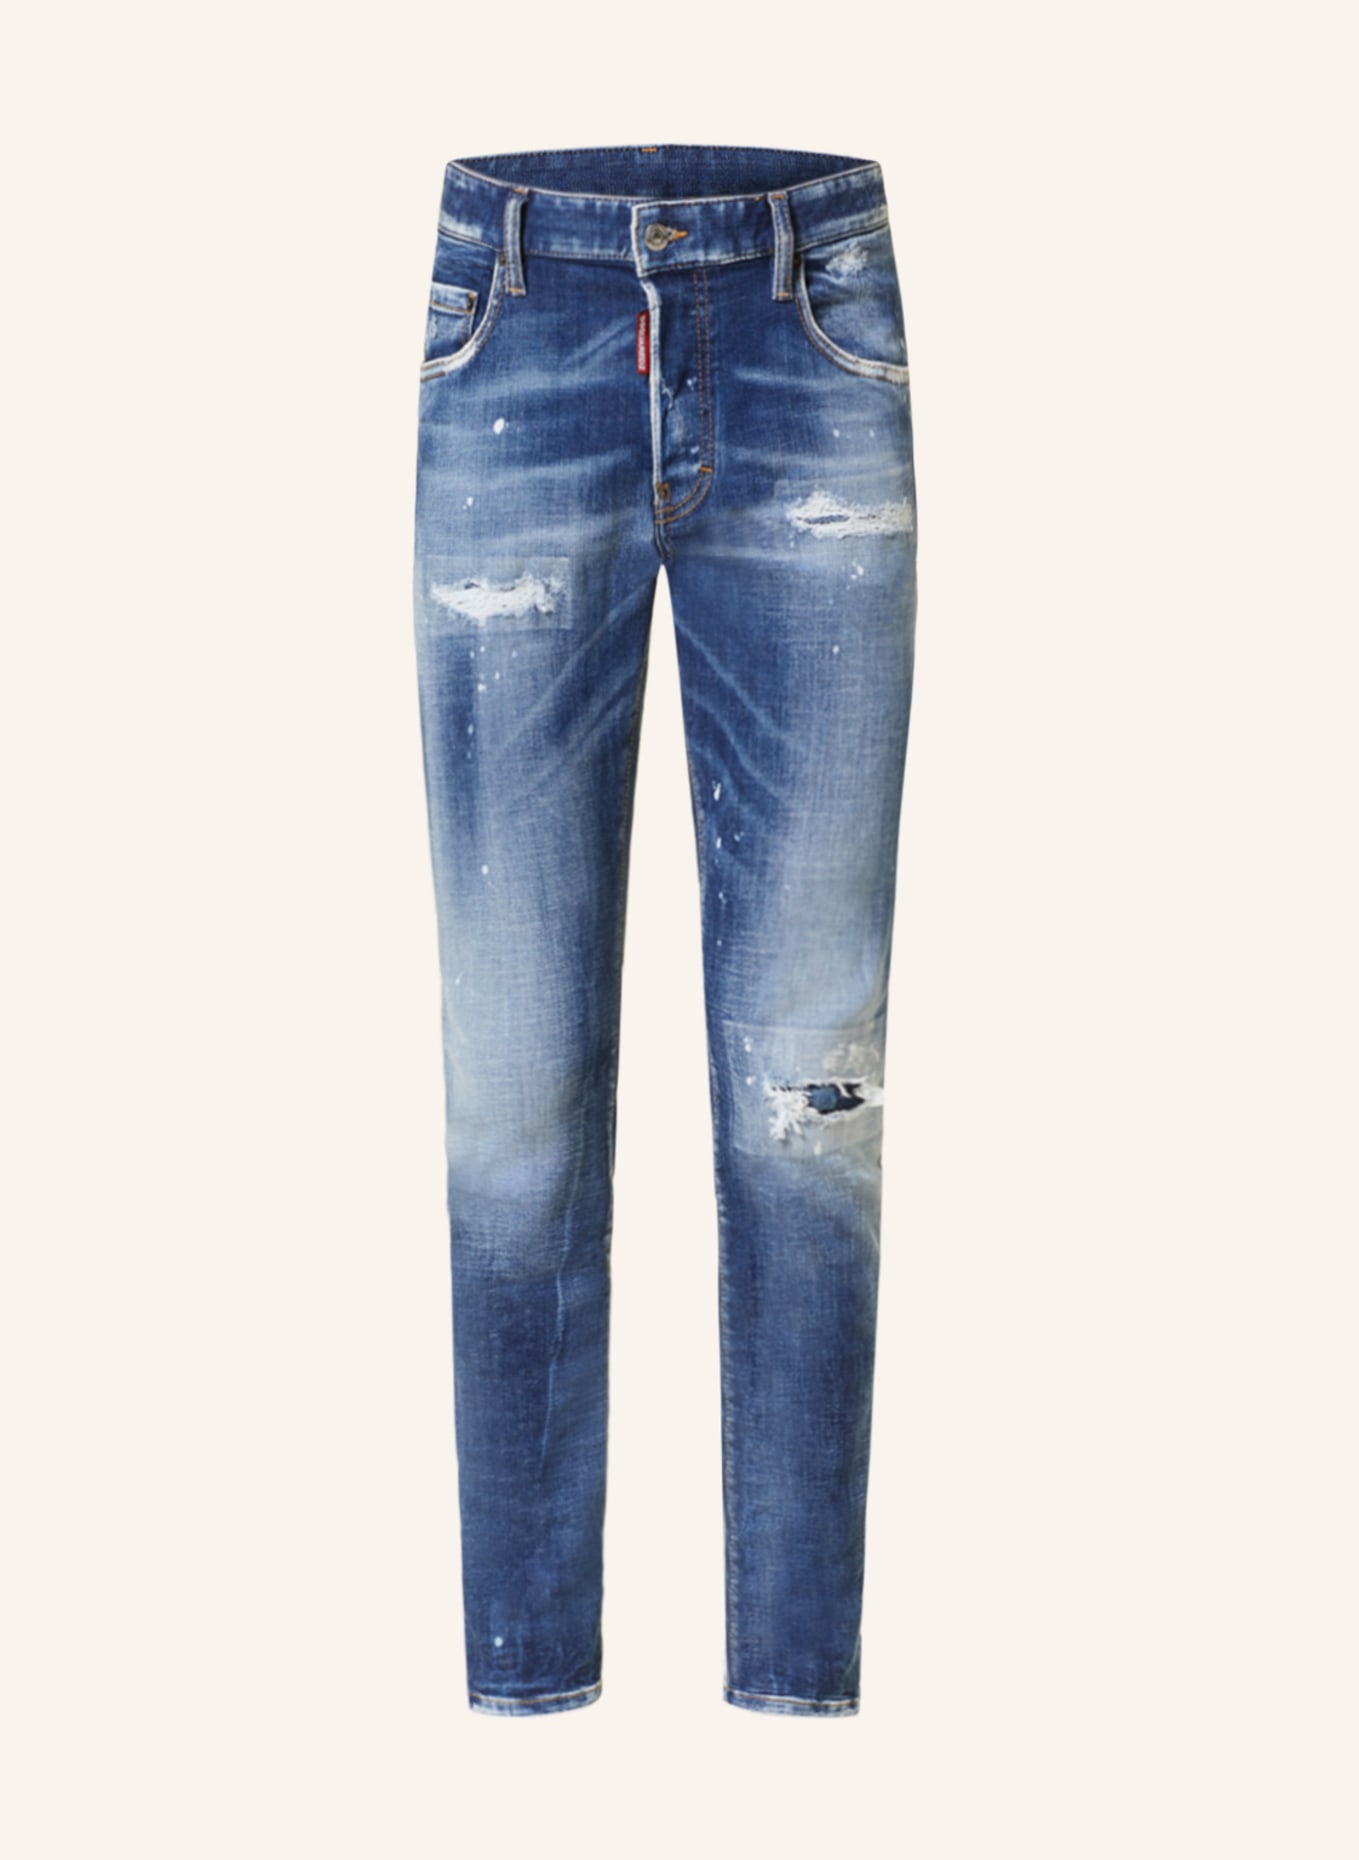 DSQUARED2 Destroyed Jeans SUPER TWINKY Extra Slim Fit, Farbe: 470 NAVY BLUE (Bild 1)